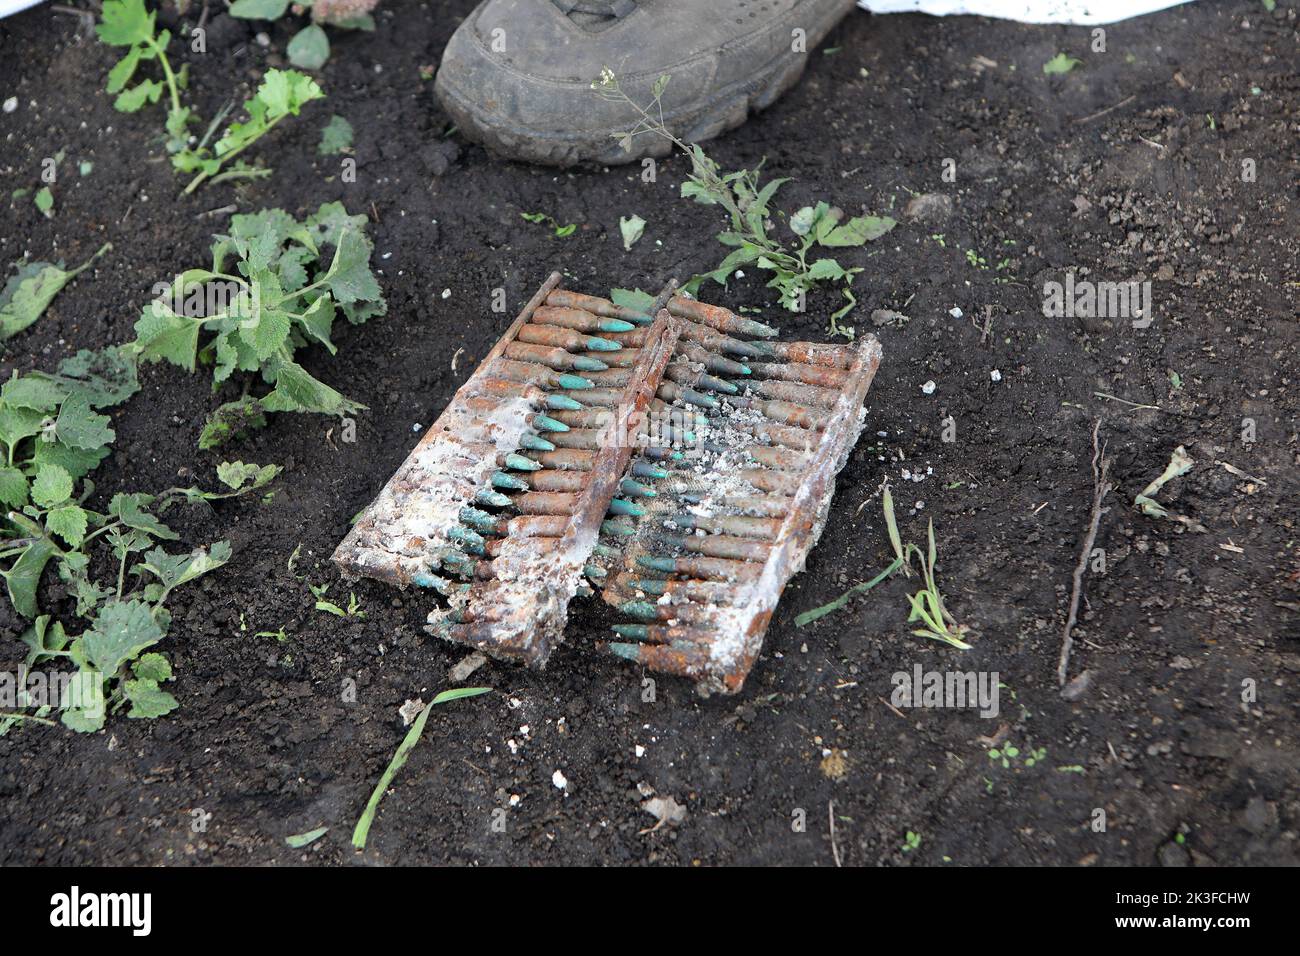 KHARKIV REGION, UKRAINE - SEPTEMBER 26, 2022 - Rusted ammunition found during the exhumation of the bodies of Ukrainian soldiers killed in action in the village of Dementiyivka recently liberated from russian invaders, in the north of Kharkiv Region, north-eastern Ukraine. Stock Photo